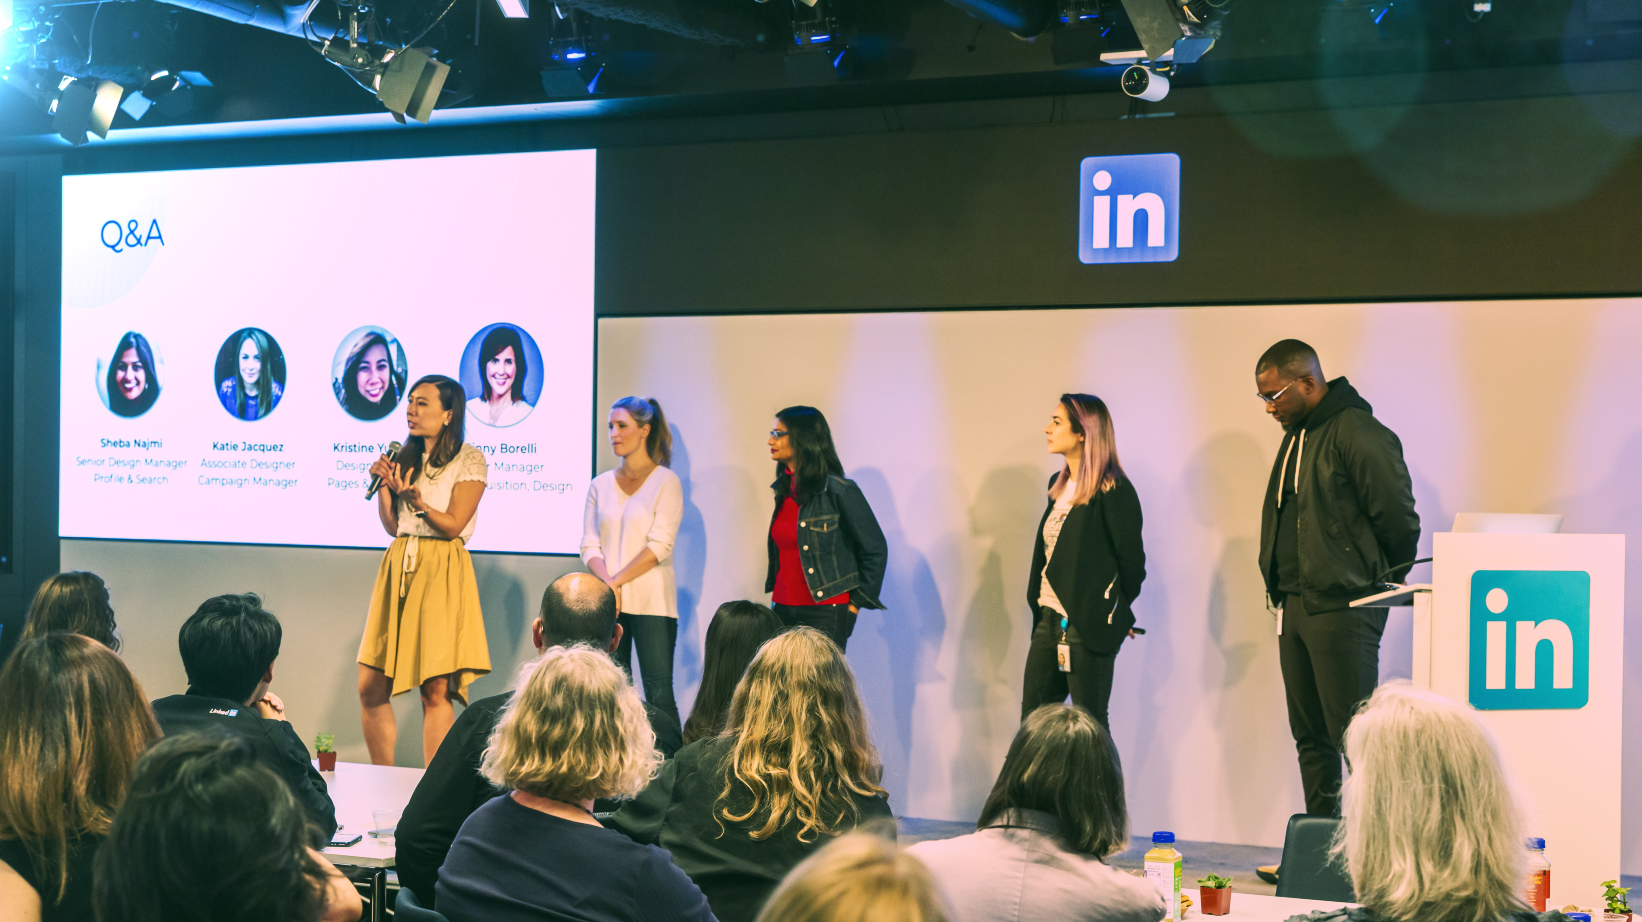 LinkedIn employees standing on stage